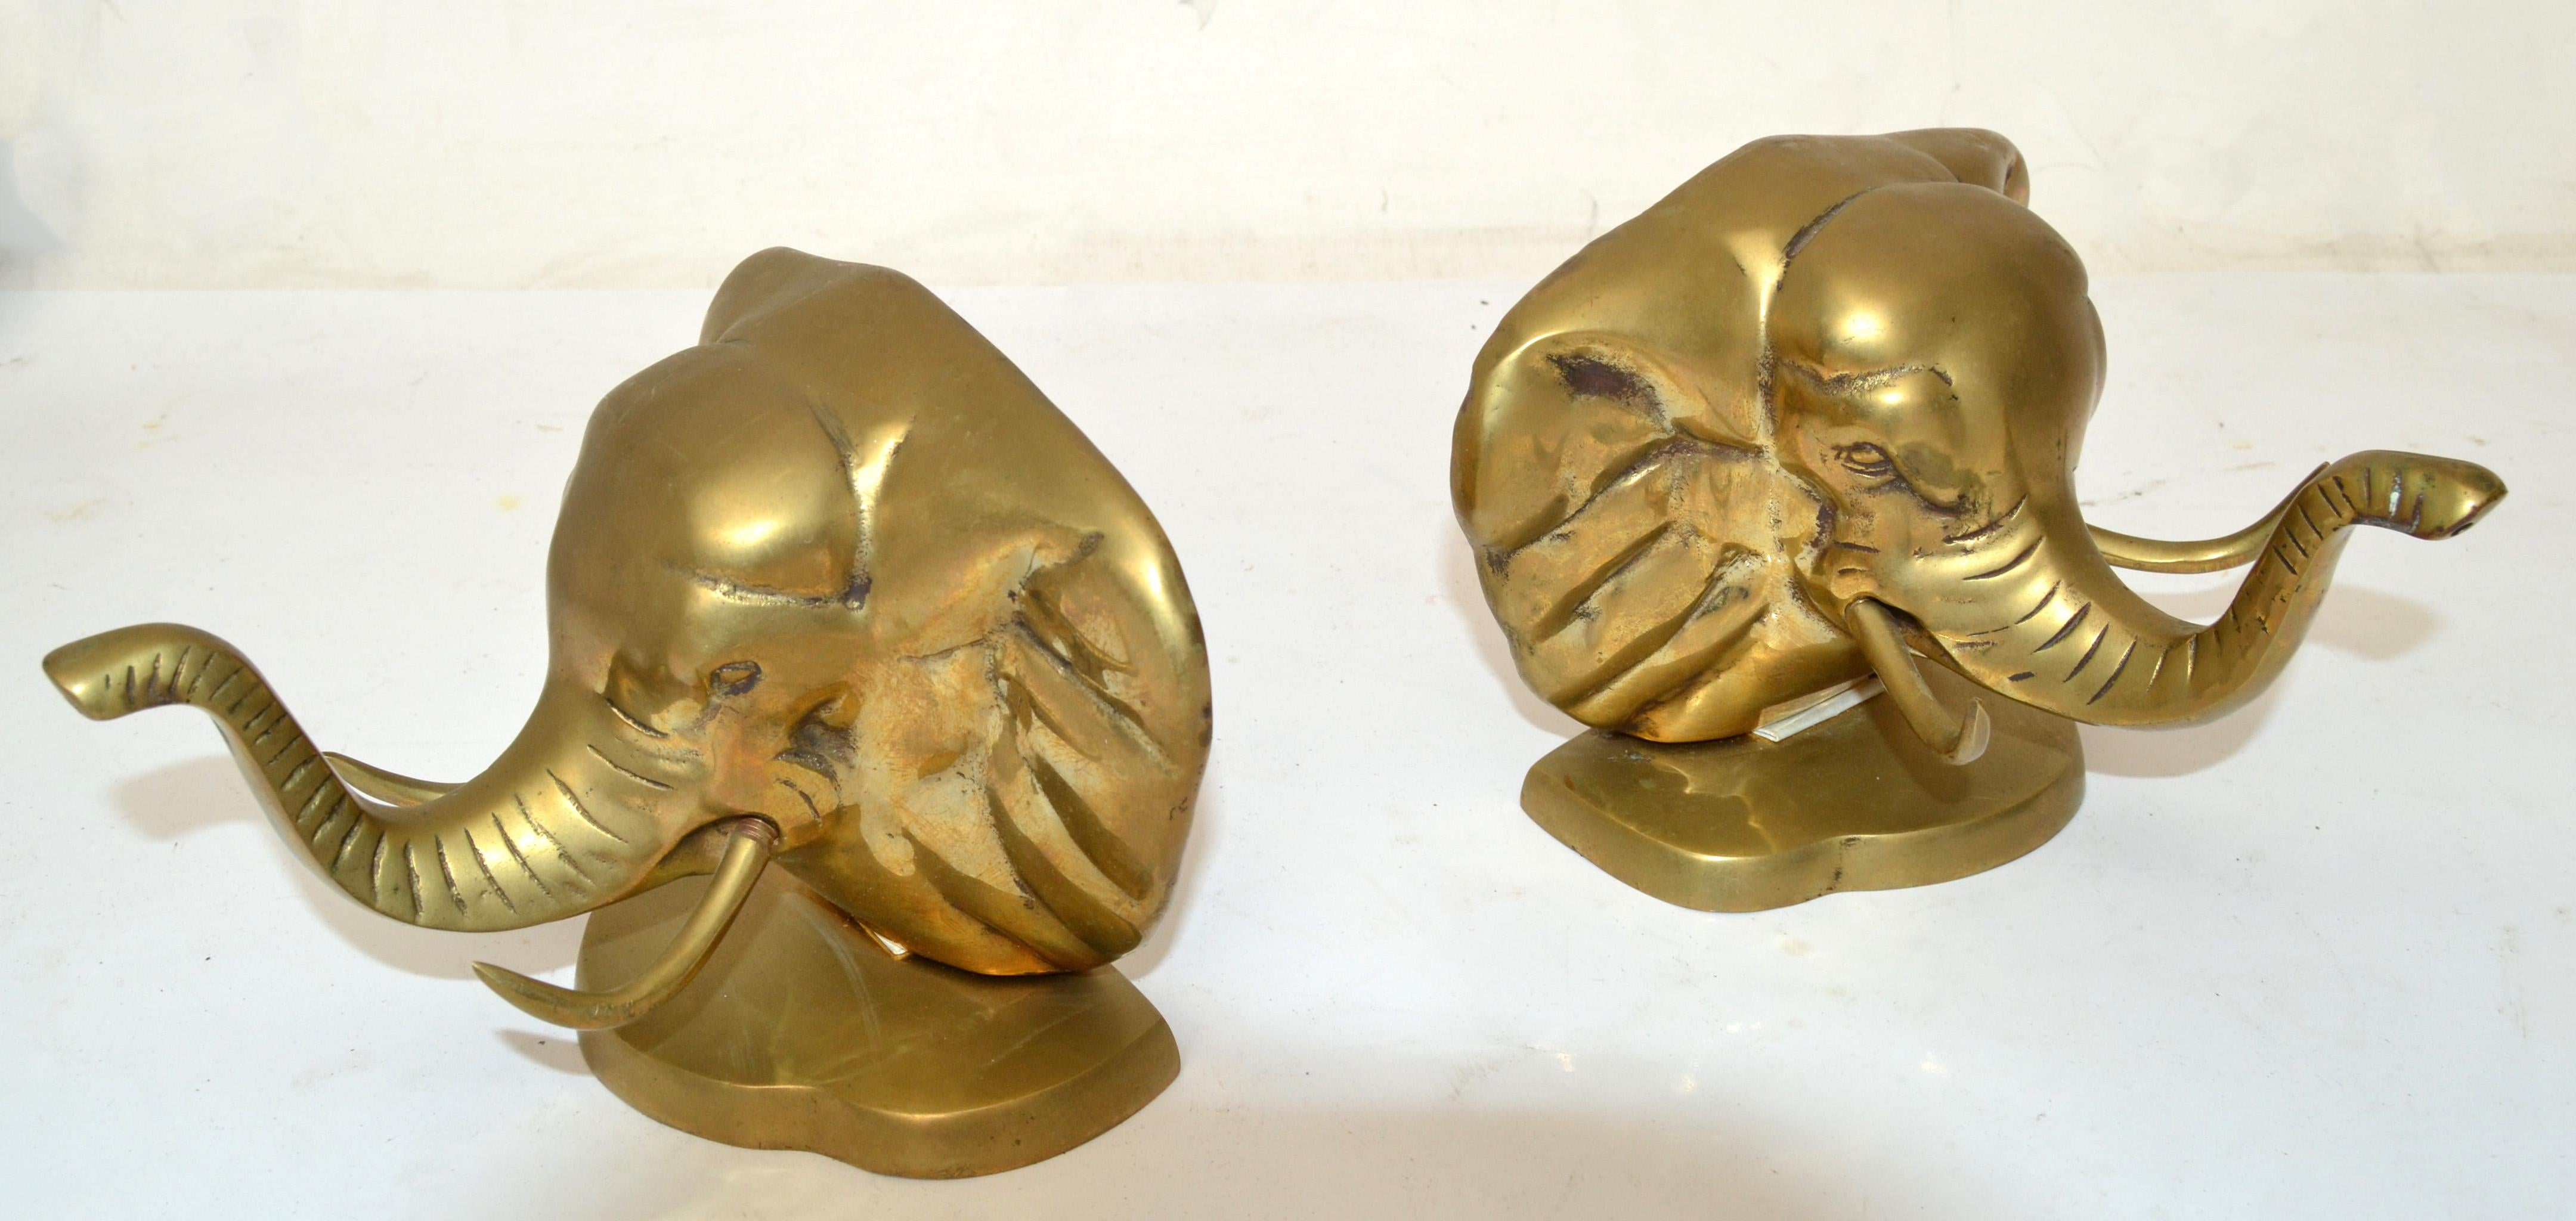 Vintage Handcrafted Brass Elephant Head Bookends, Pair For Sale 4